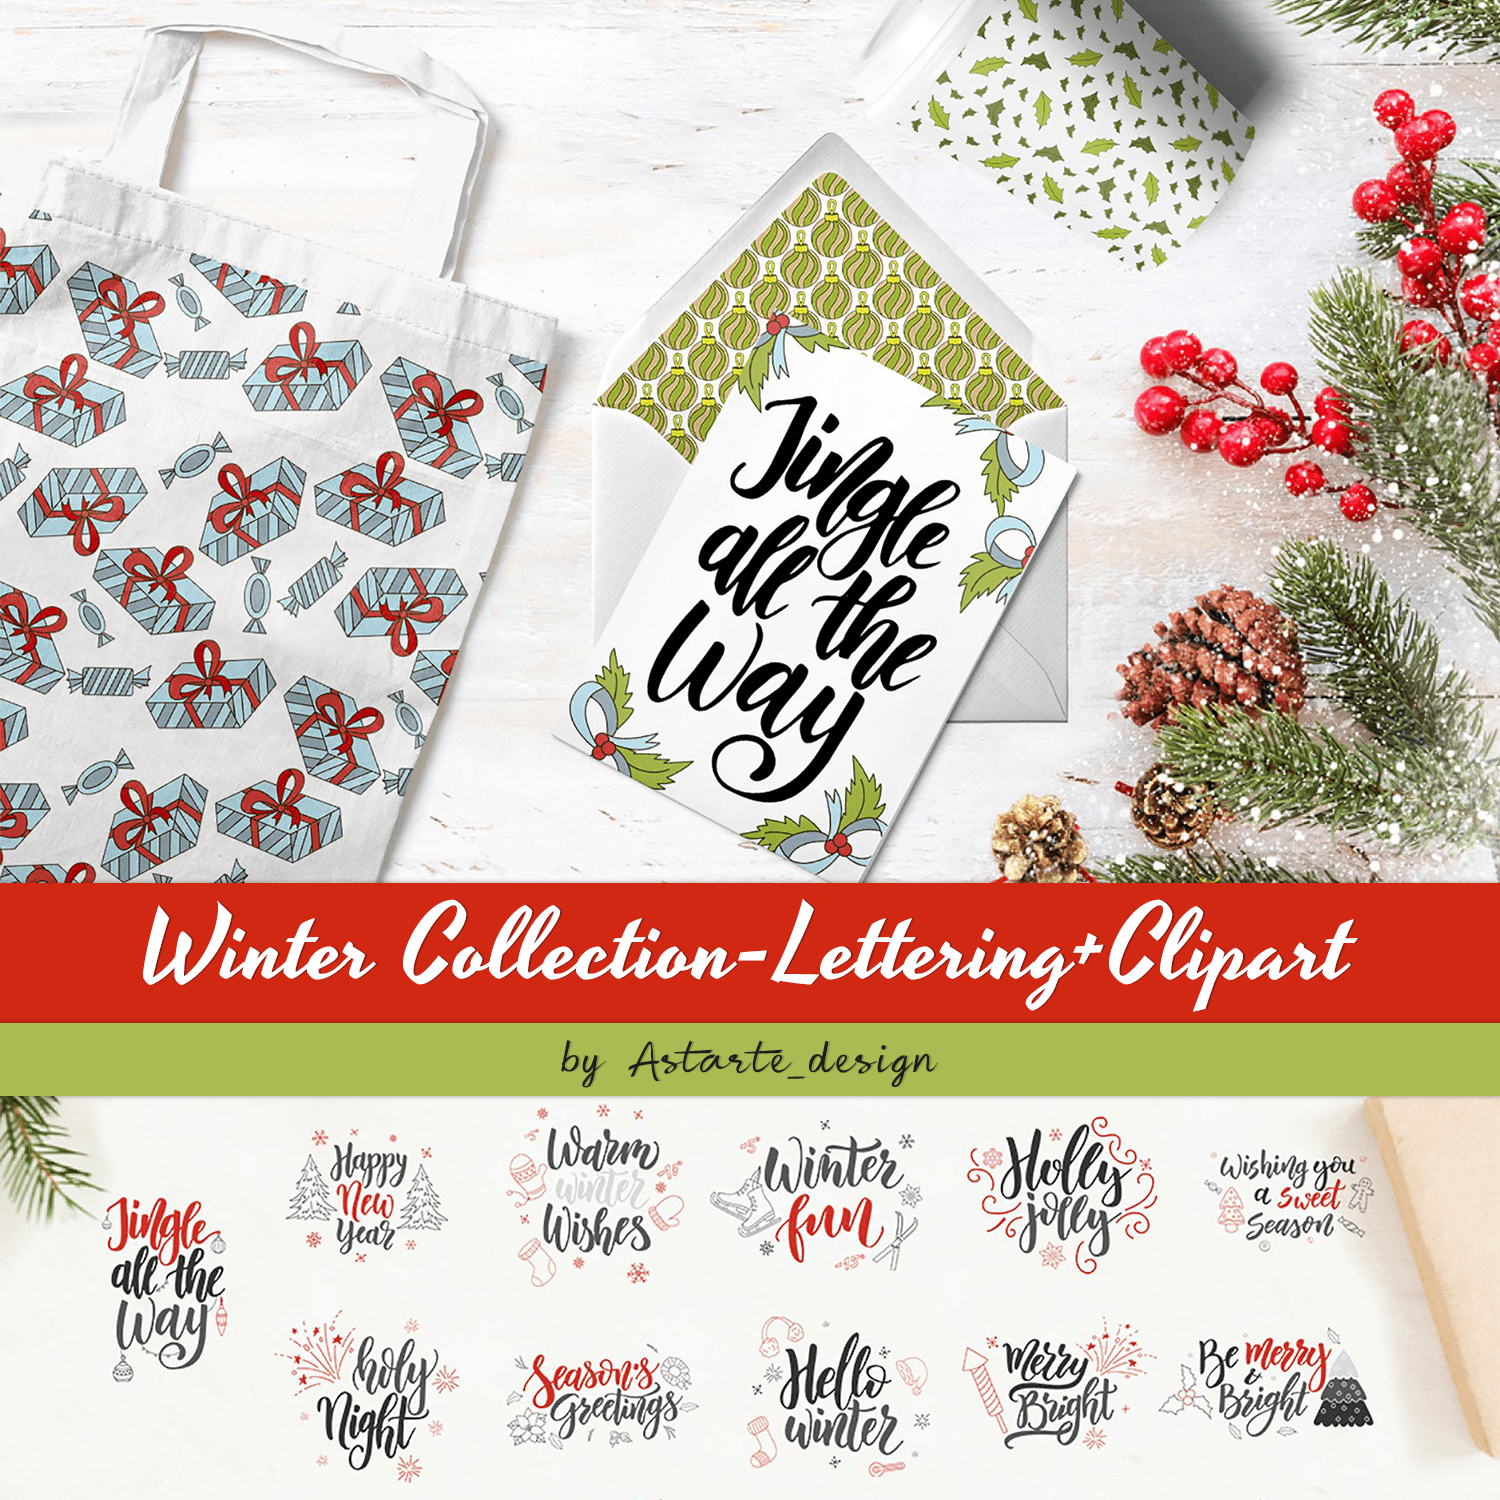 Winter Collection-Lettering+Clipart.